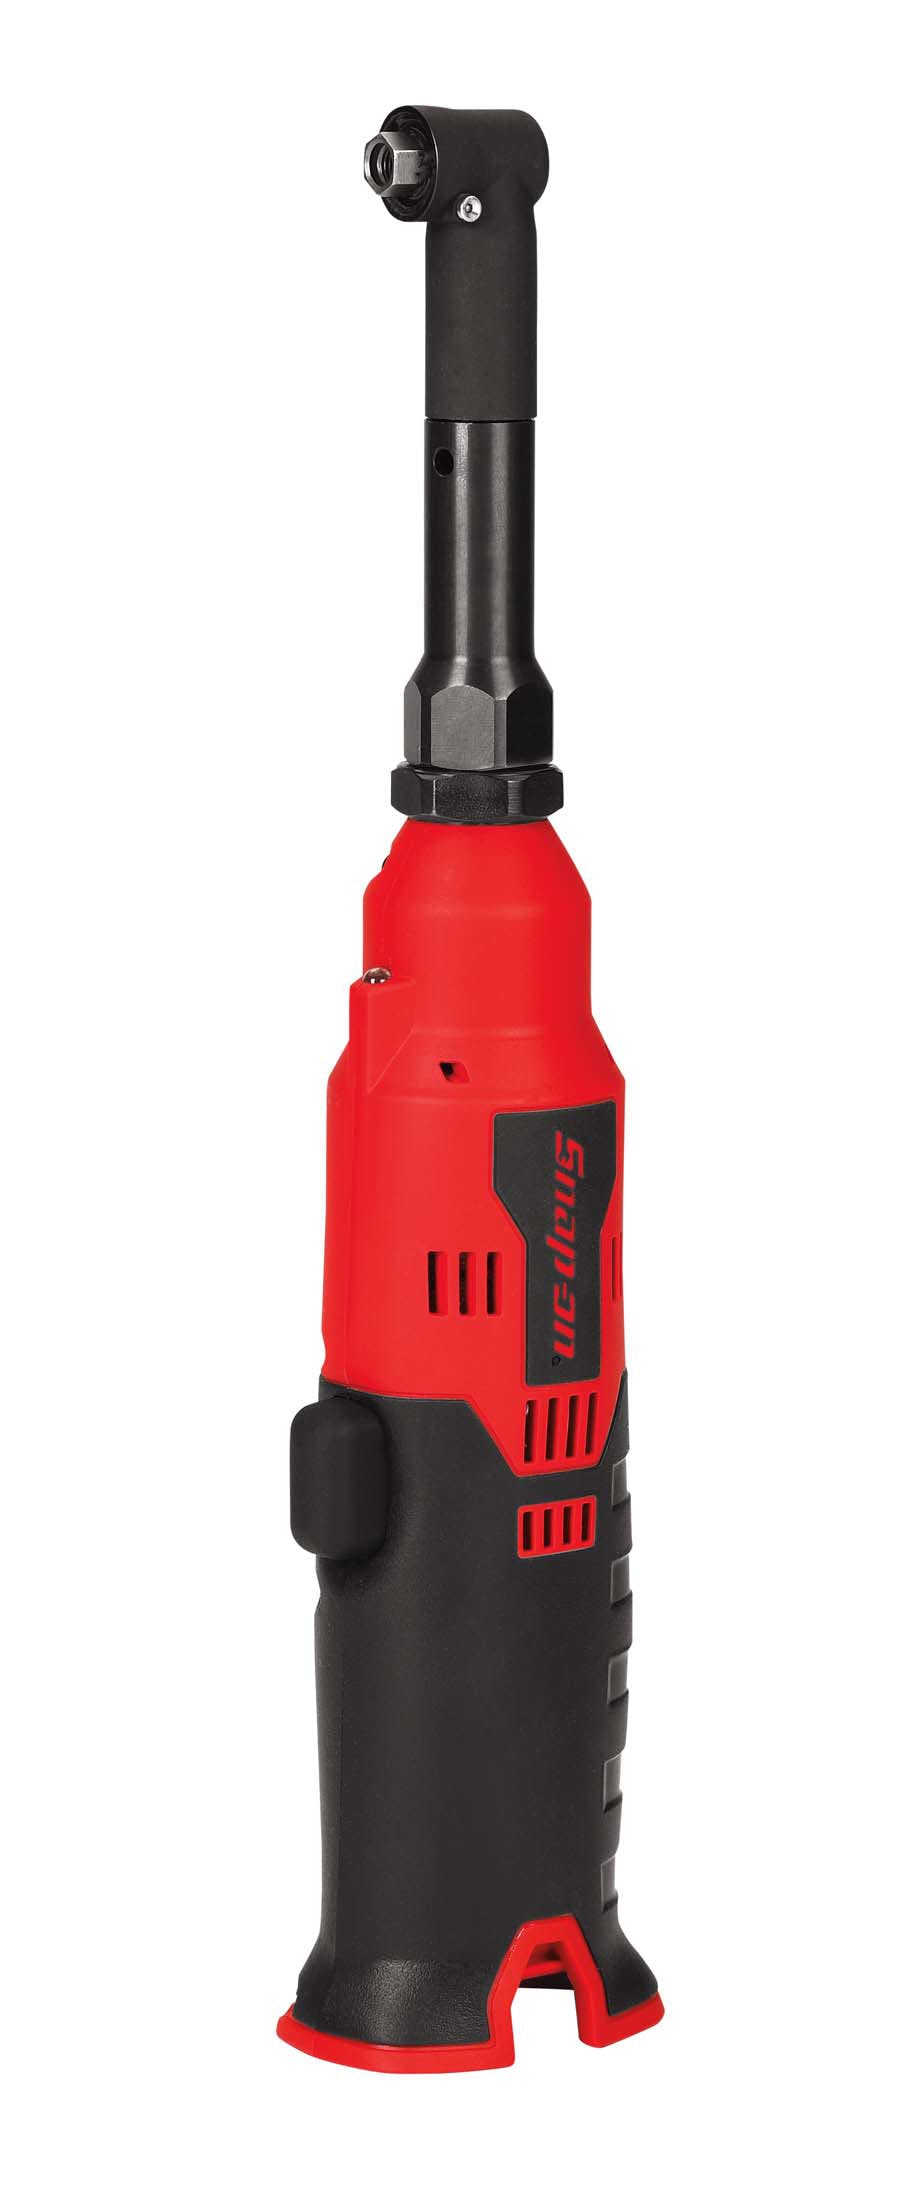 14.4 V MicroLithium Cordless Right Angle Mini Drill (Tool Only) (Red), CDRR2005DB